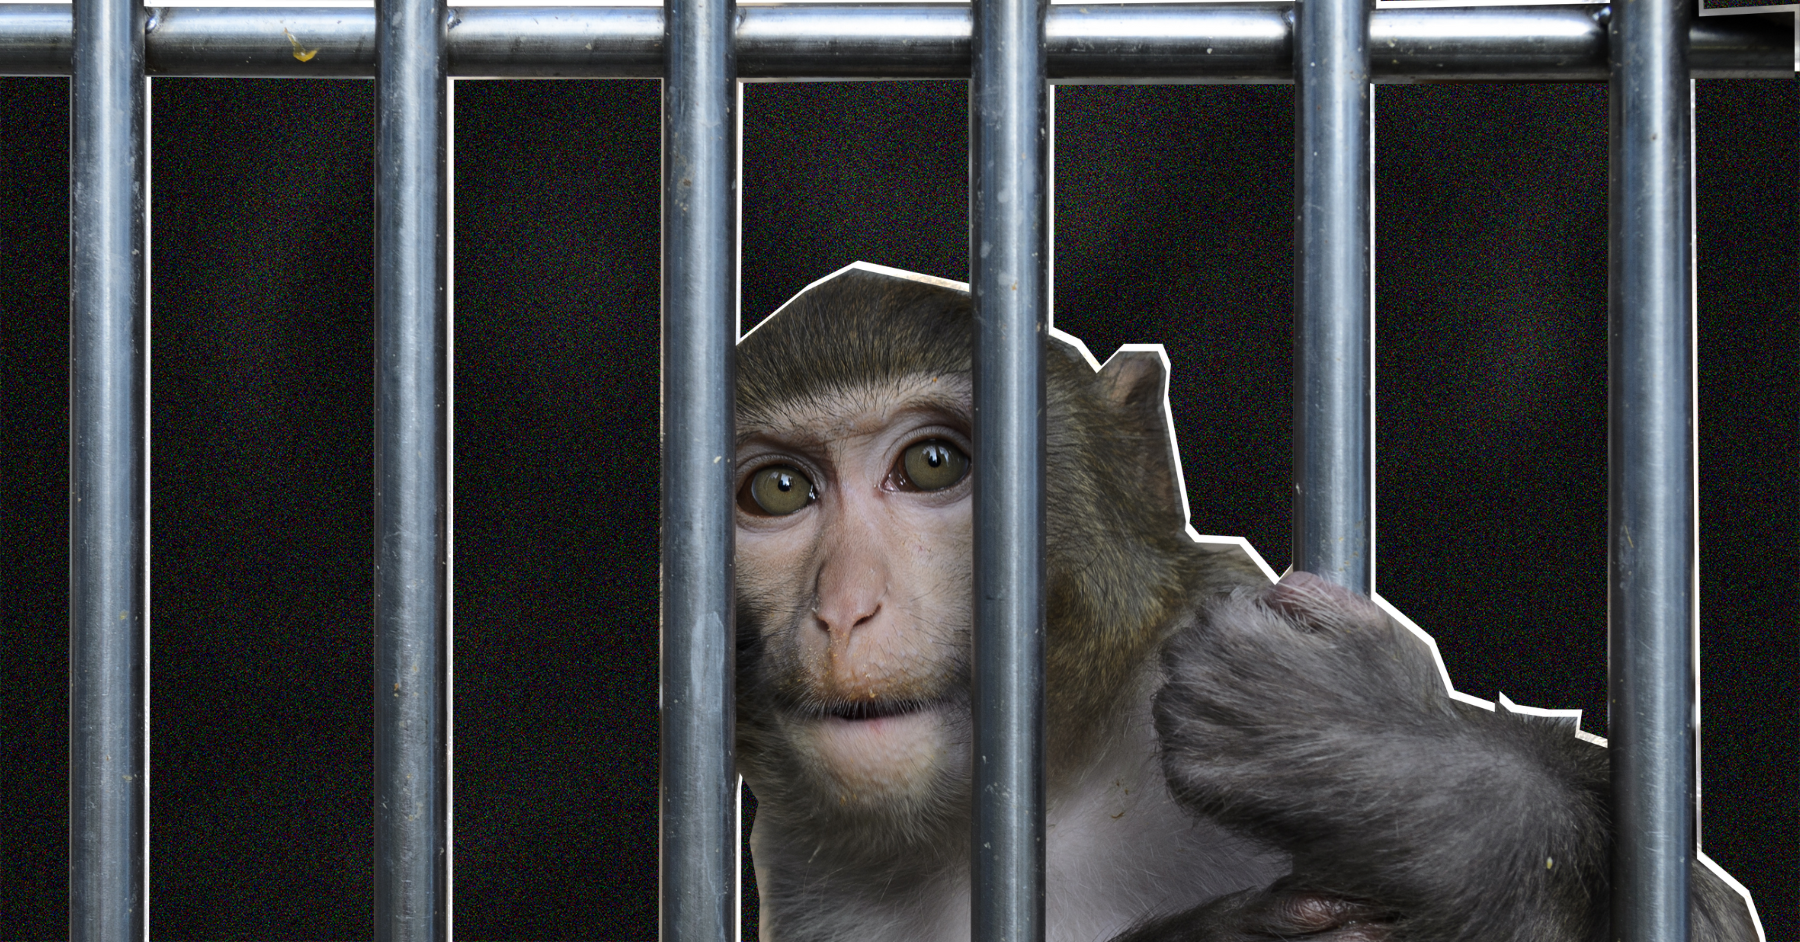 8 Charged in Scheme to Smuggle Endangered Monkeys From Asia, U.S.